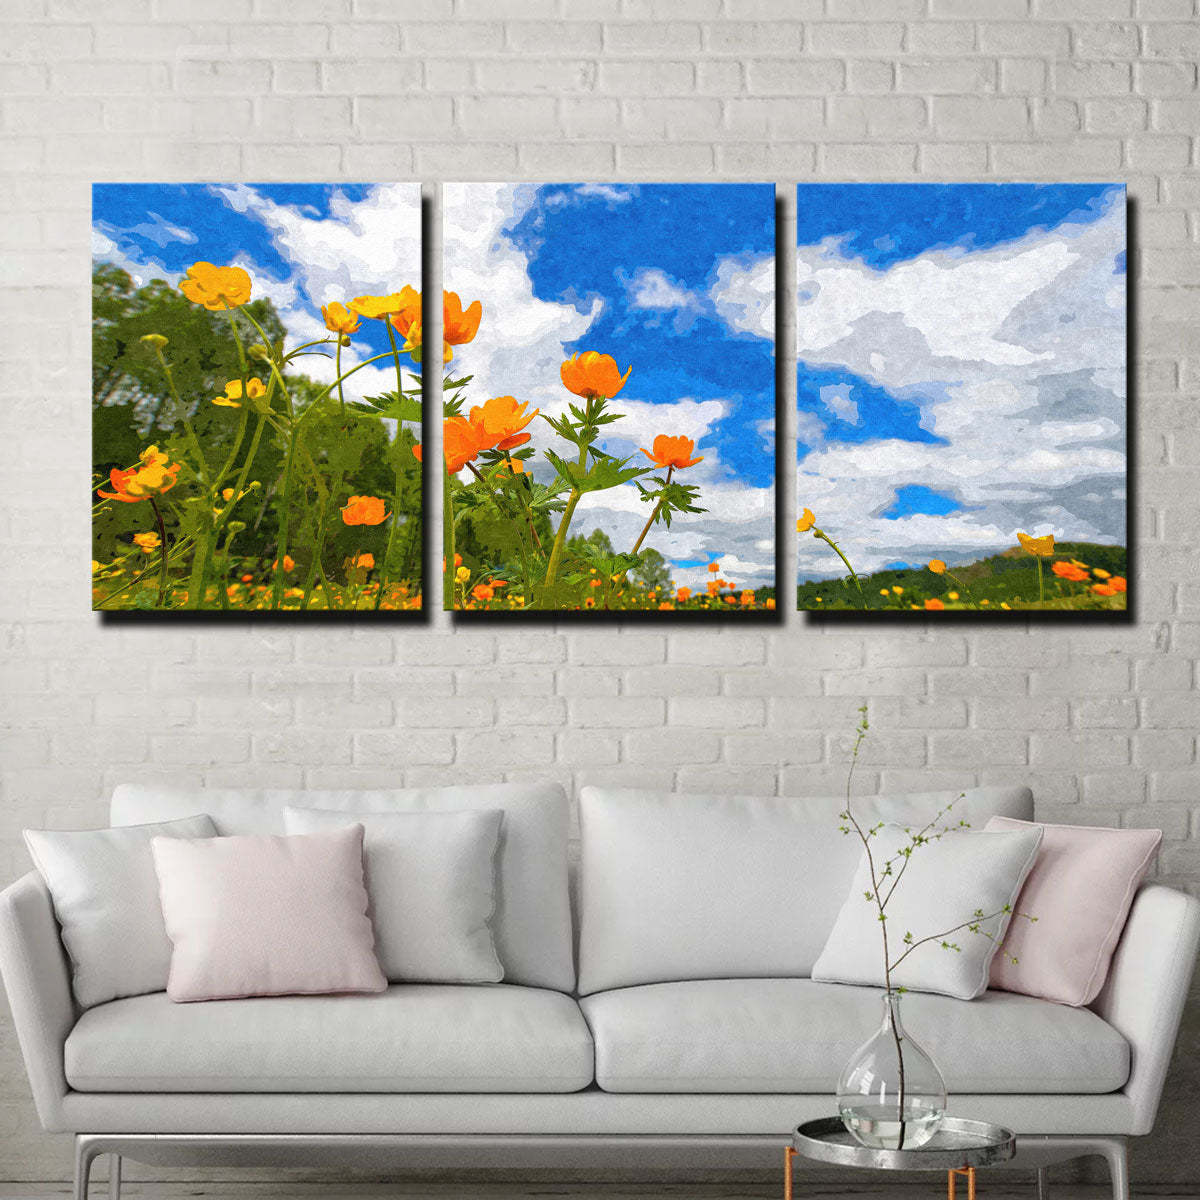 California Poppies Under The Blue Skies